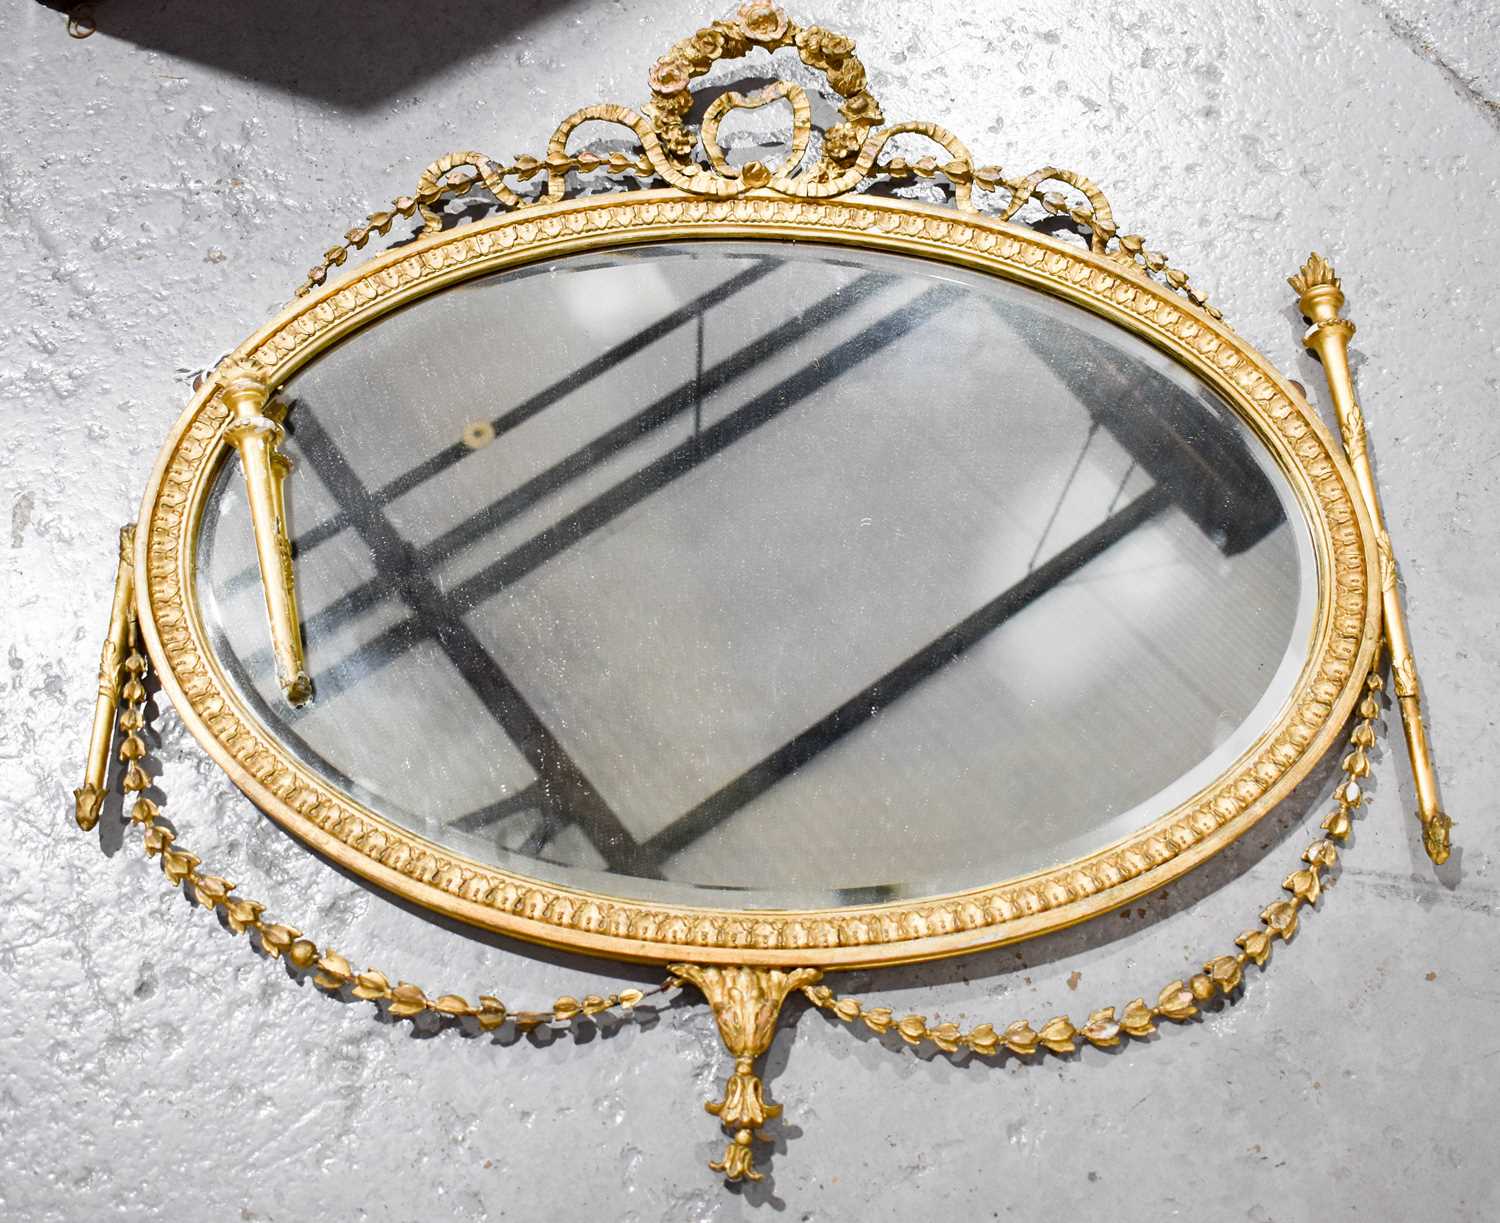 A 19th century oval giltwood mirror, with two pillars holding flames to either side, harebell and